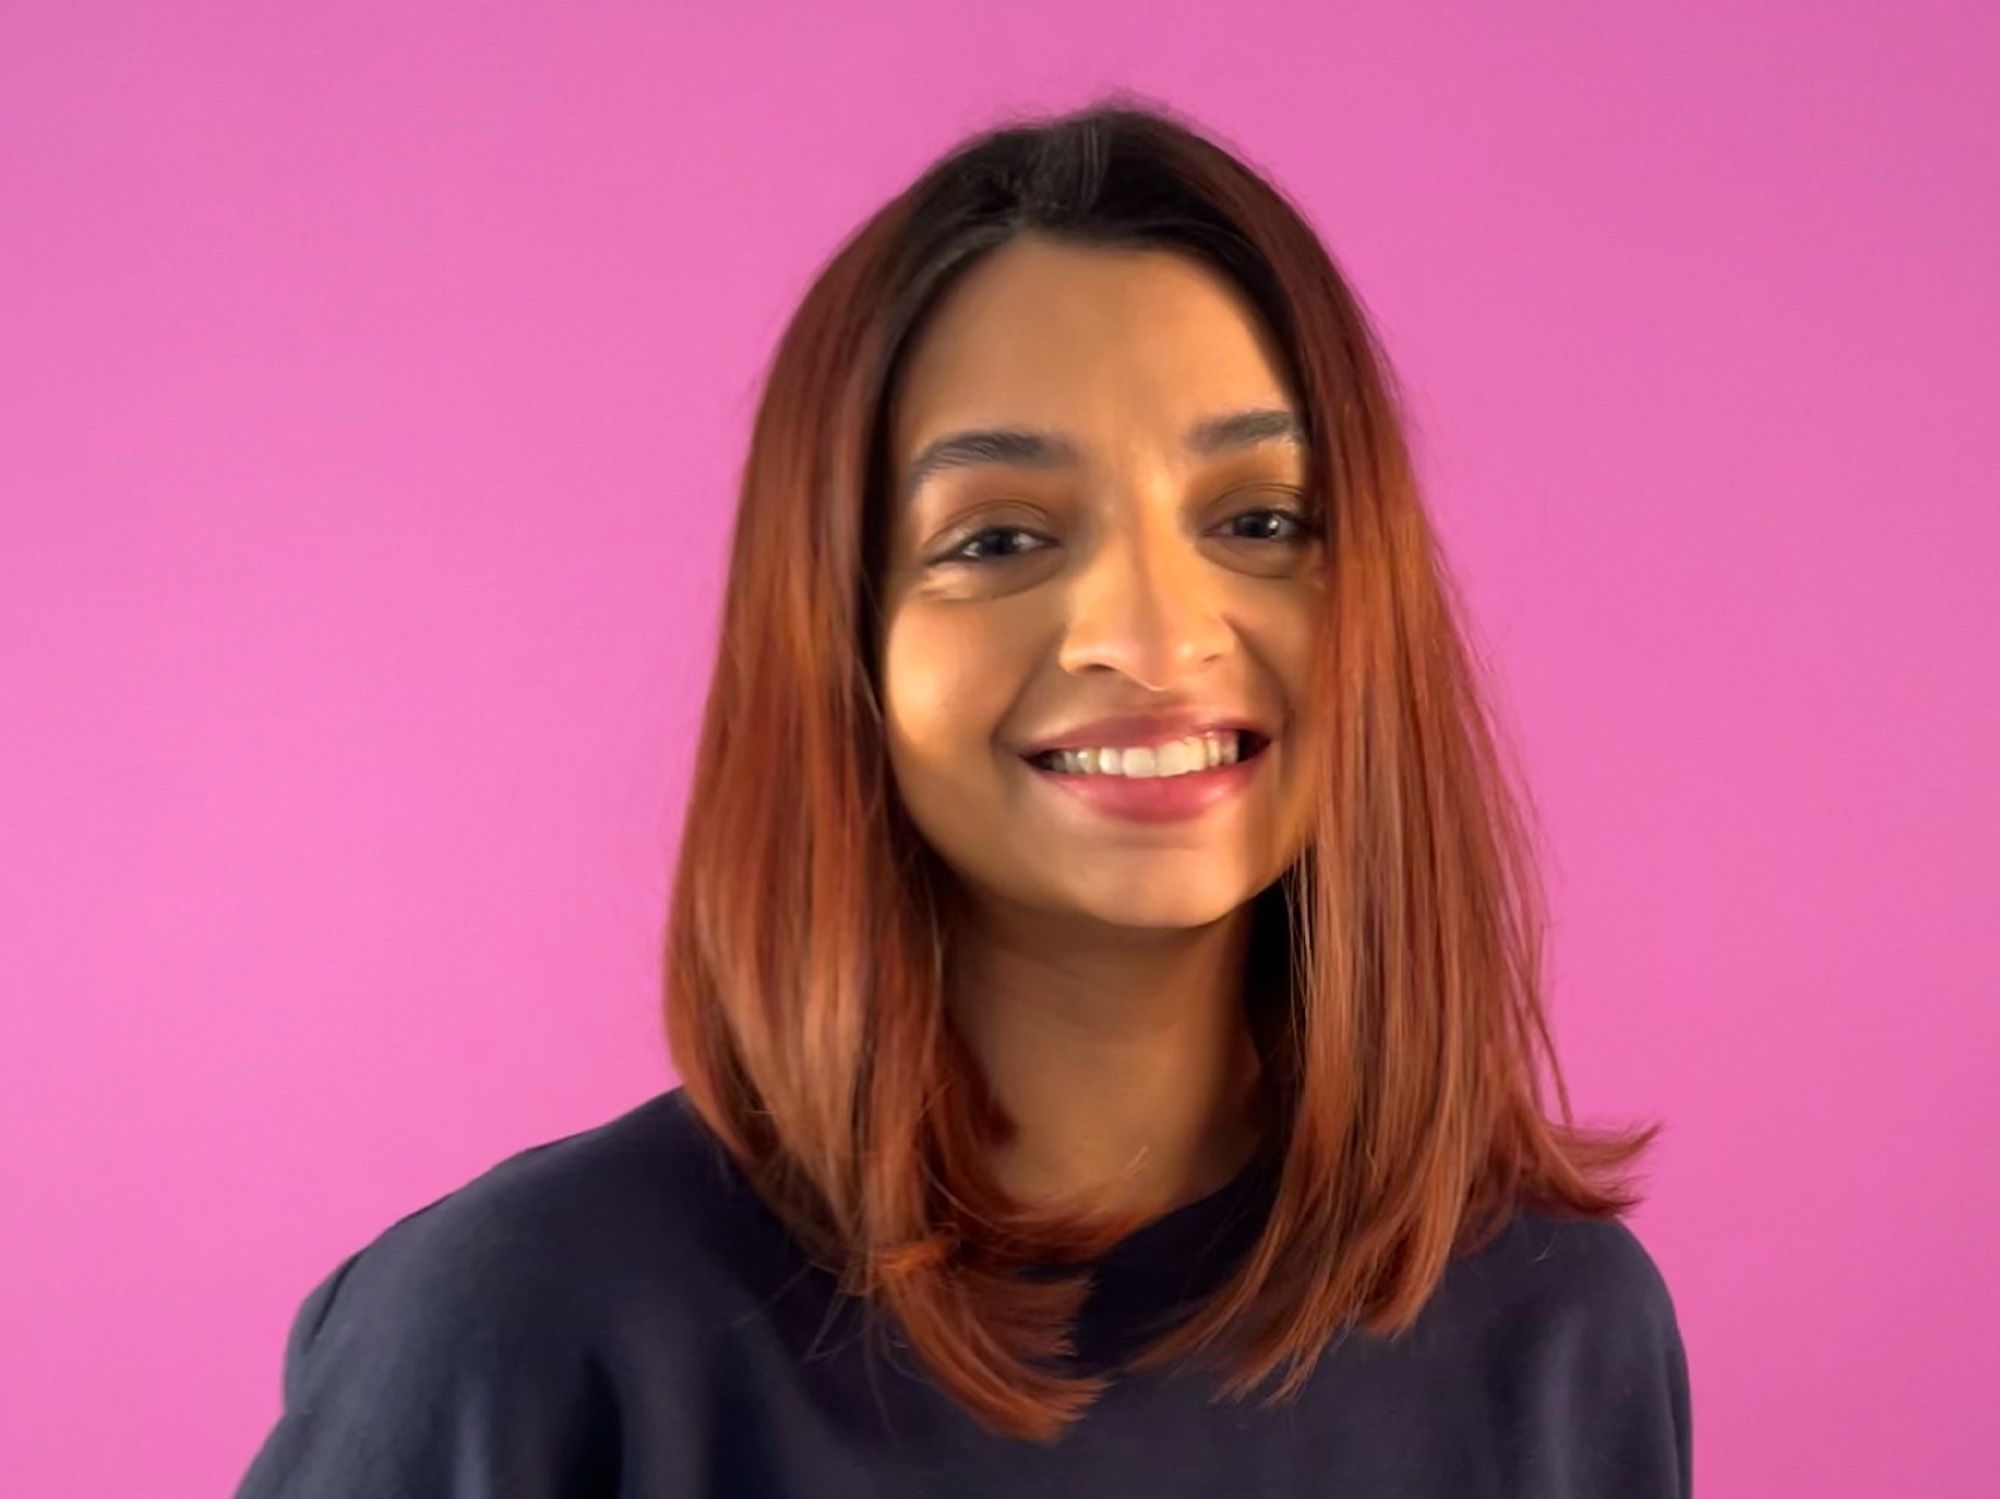 A young womanin a dark blue sweater smiles at the camera ,against a pink background